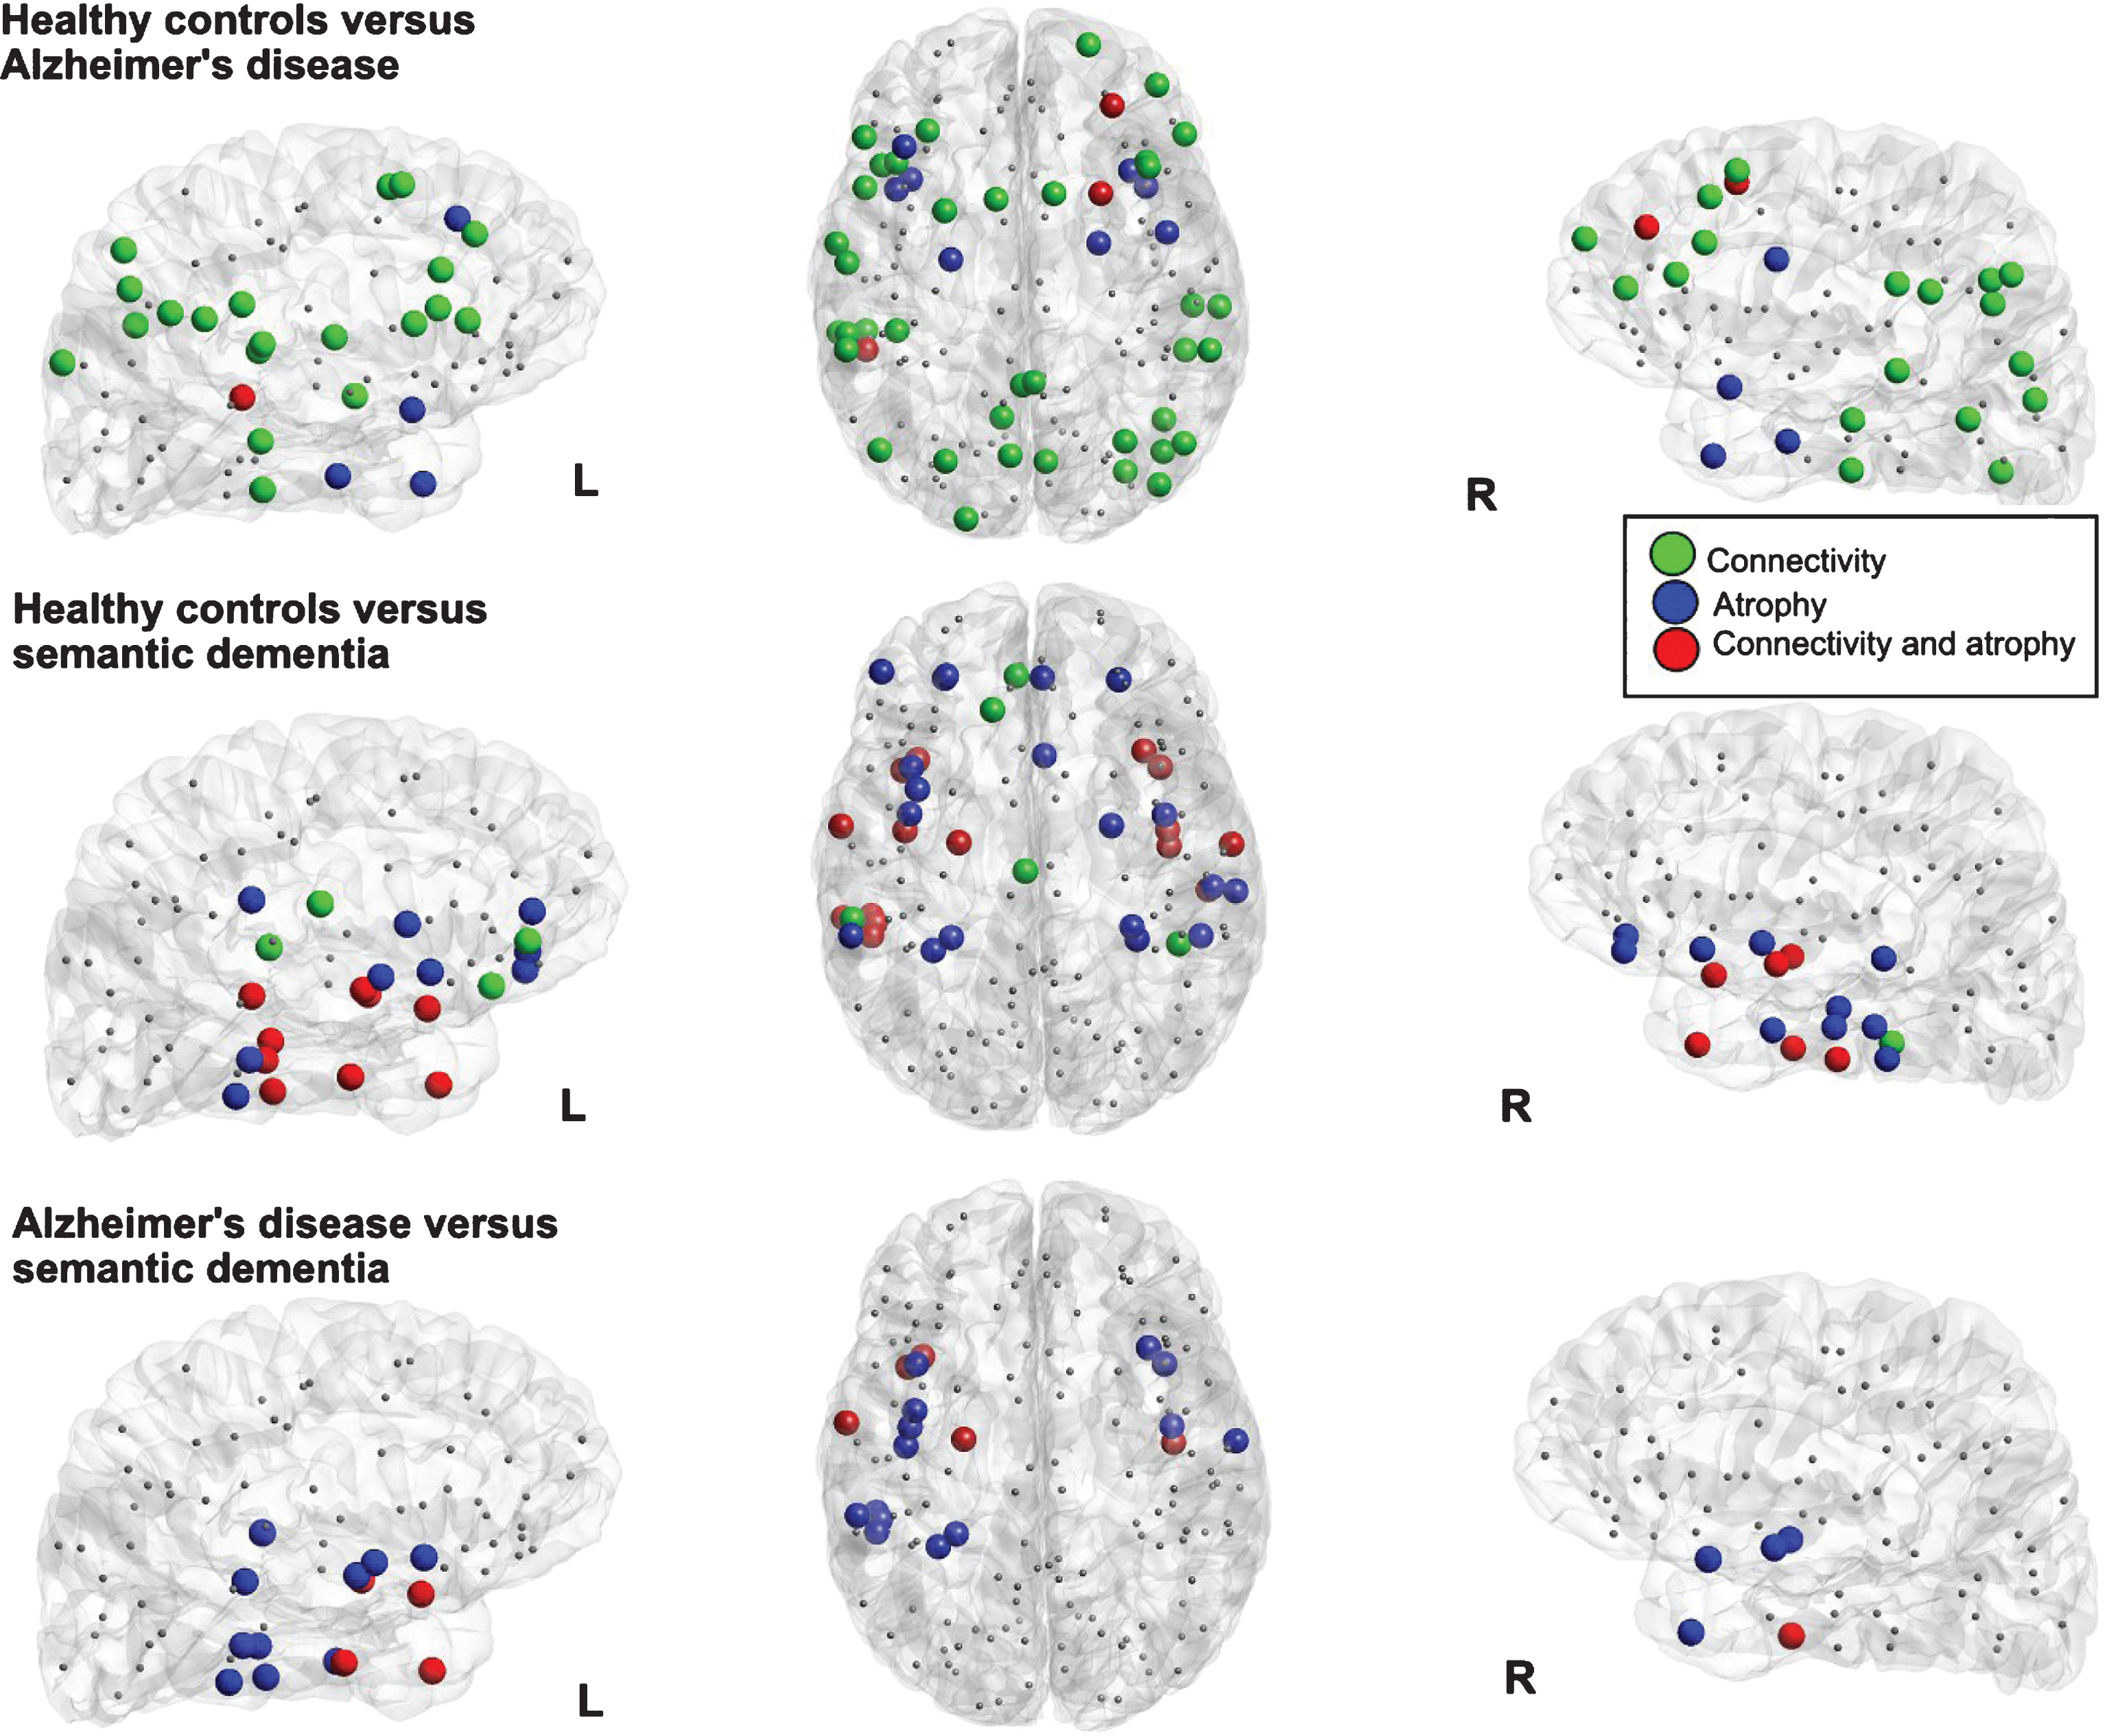 Visualization of the local differences in the cortical networks of healthy controls versus Alzheimer’s disease (top row) and healthy controls versus semantic dementia (bottom row). Colored nodes indicate significant differences in connectivity strength (green nodes), grey matter volume (blue nodes, significant difference in at least 50 voxels and >1% of the region), or both (red nodes).